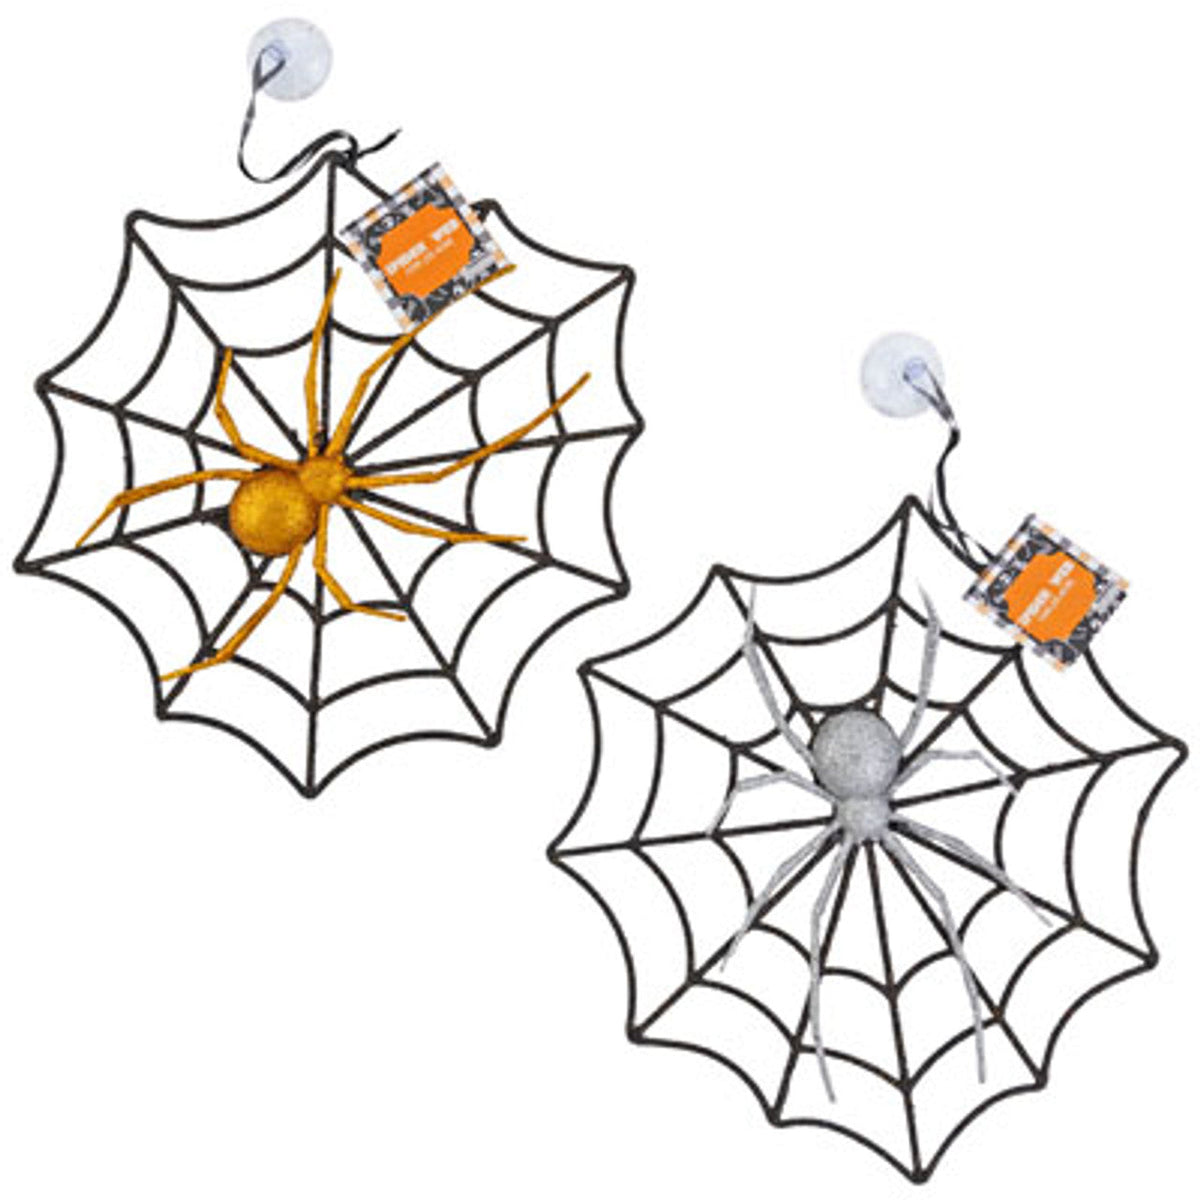 REGEN PRODUCTS CORP. Halloween Web Hanging Decoration, 10 Inches, Assortment, 1 Count